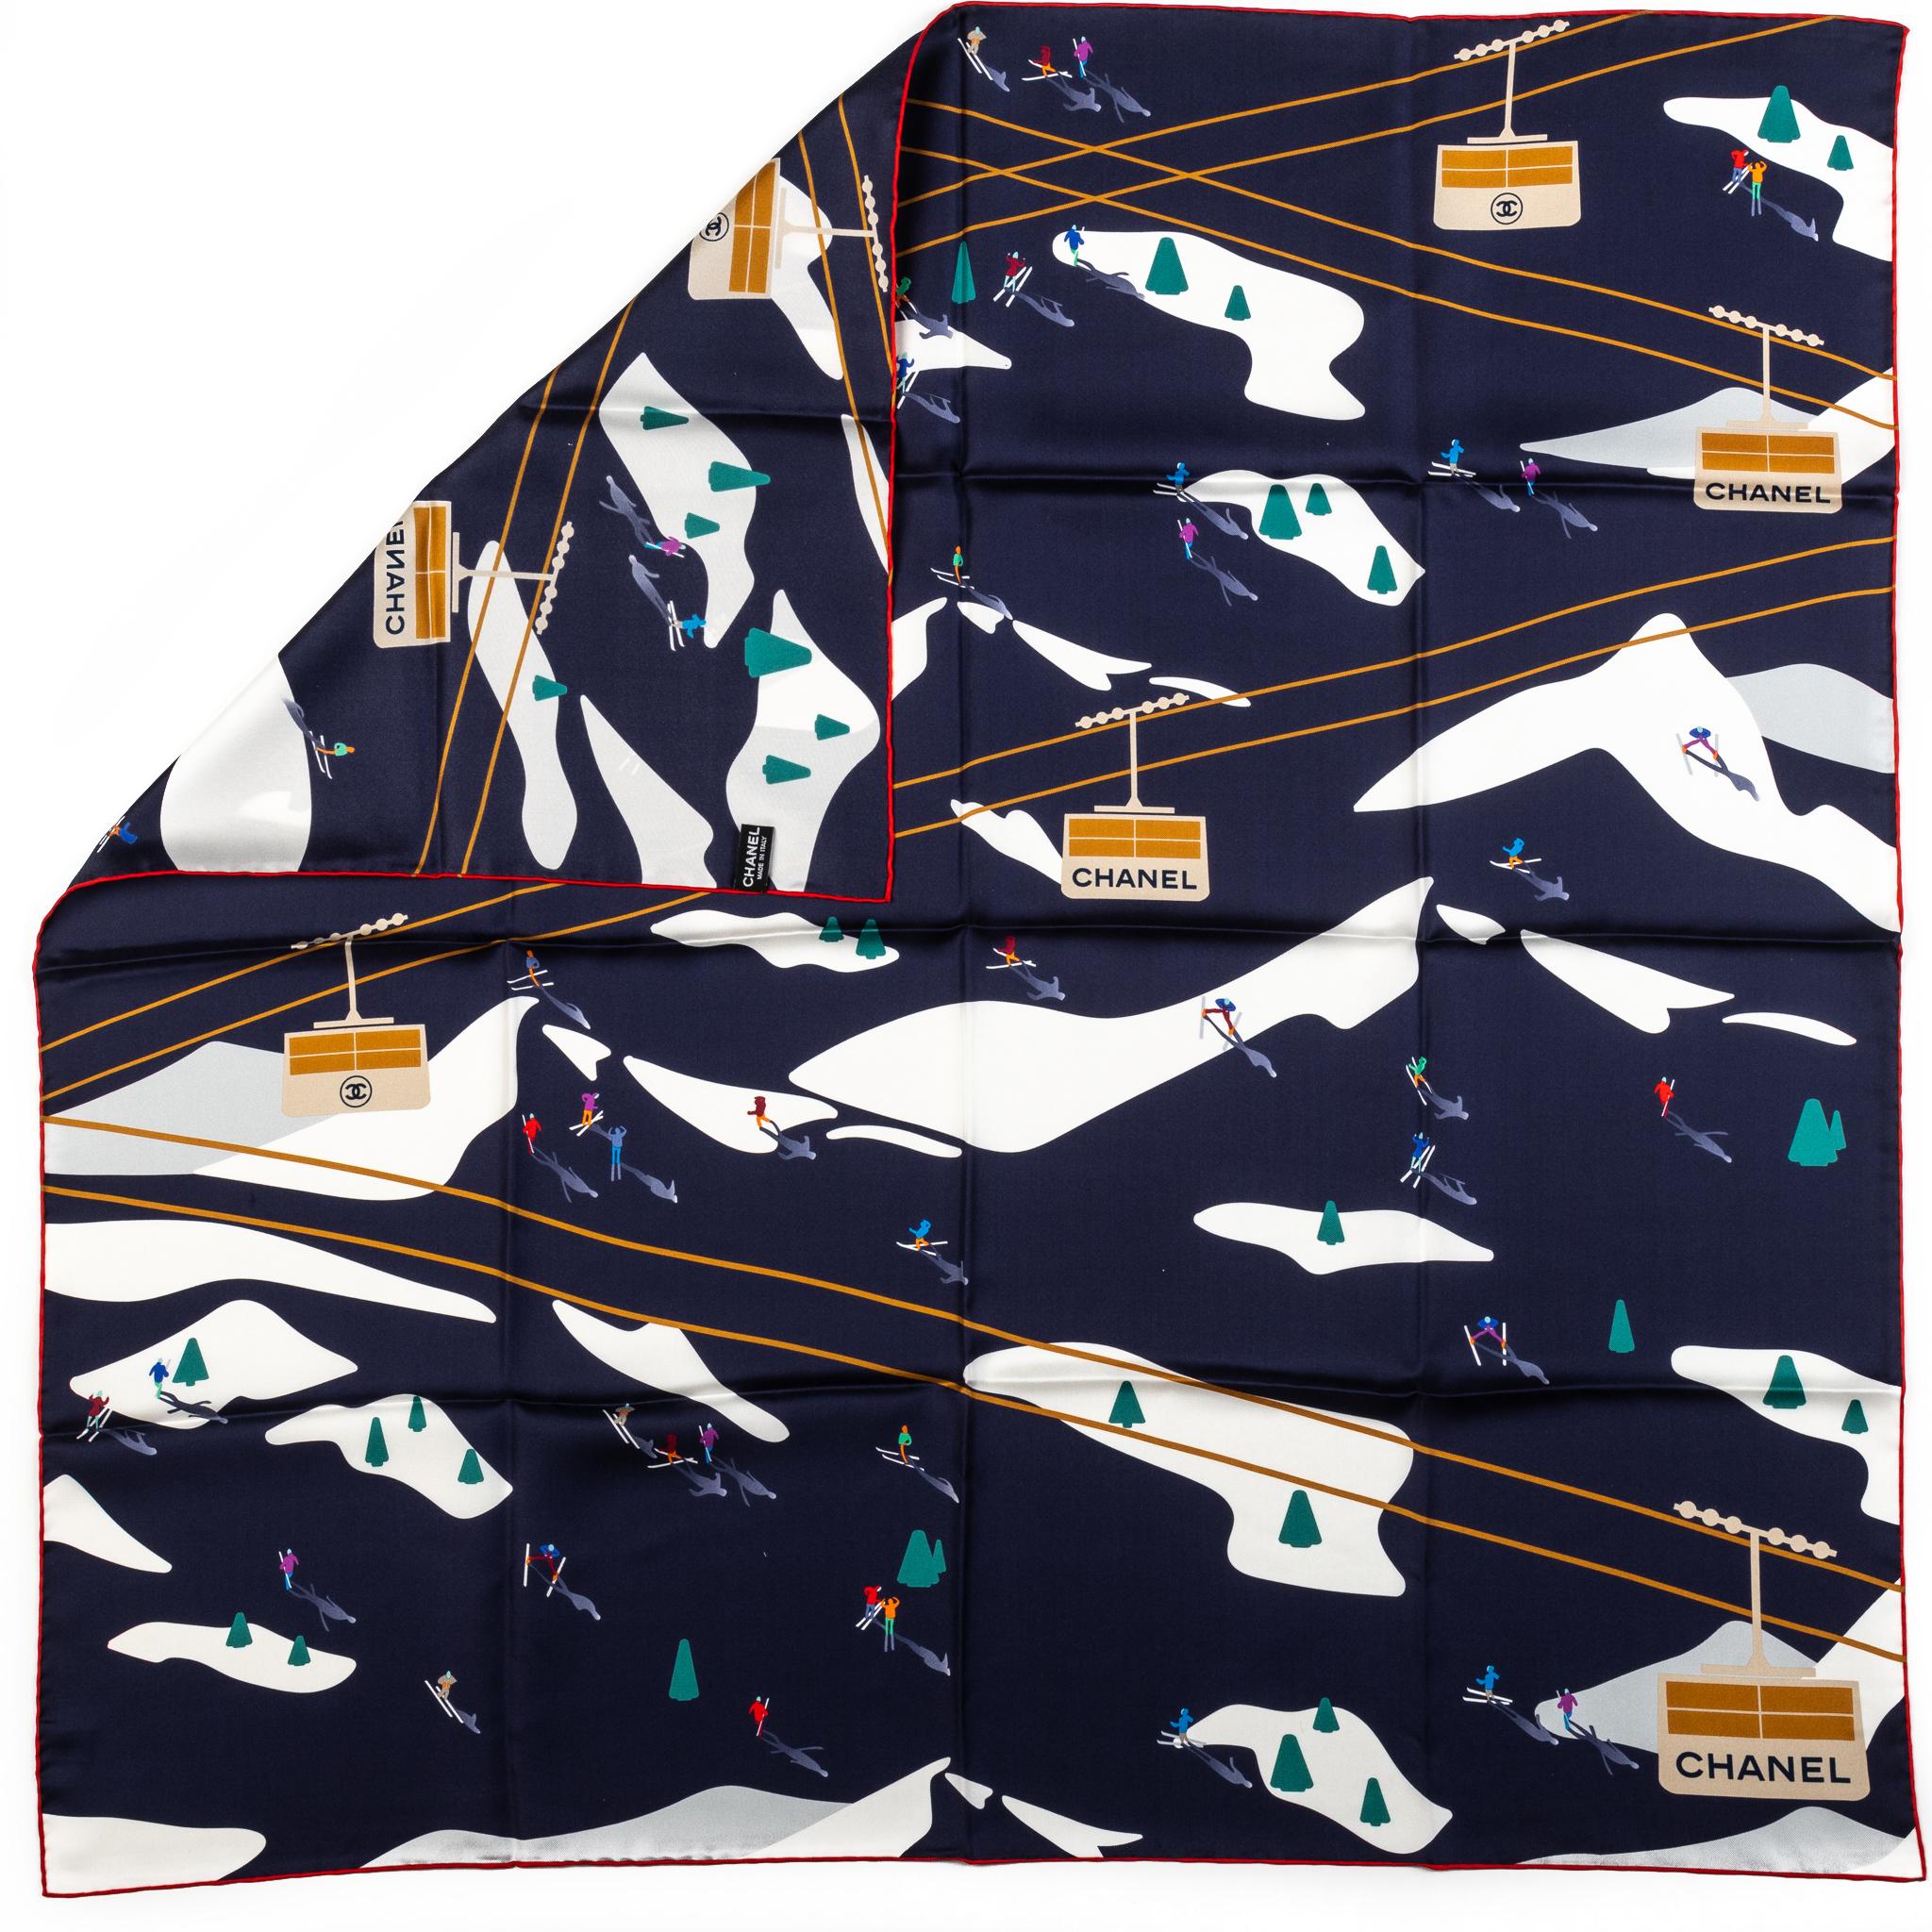 Chanel brand new mountains design 100% silk scarf in navy and white combination . Hand rolled edges. Care tag.